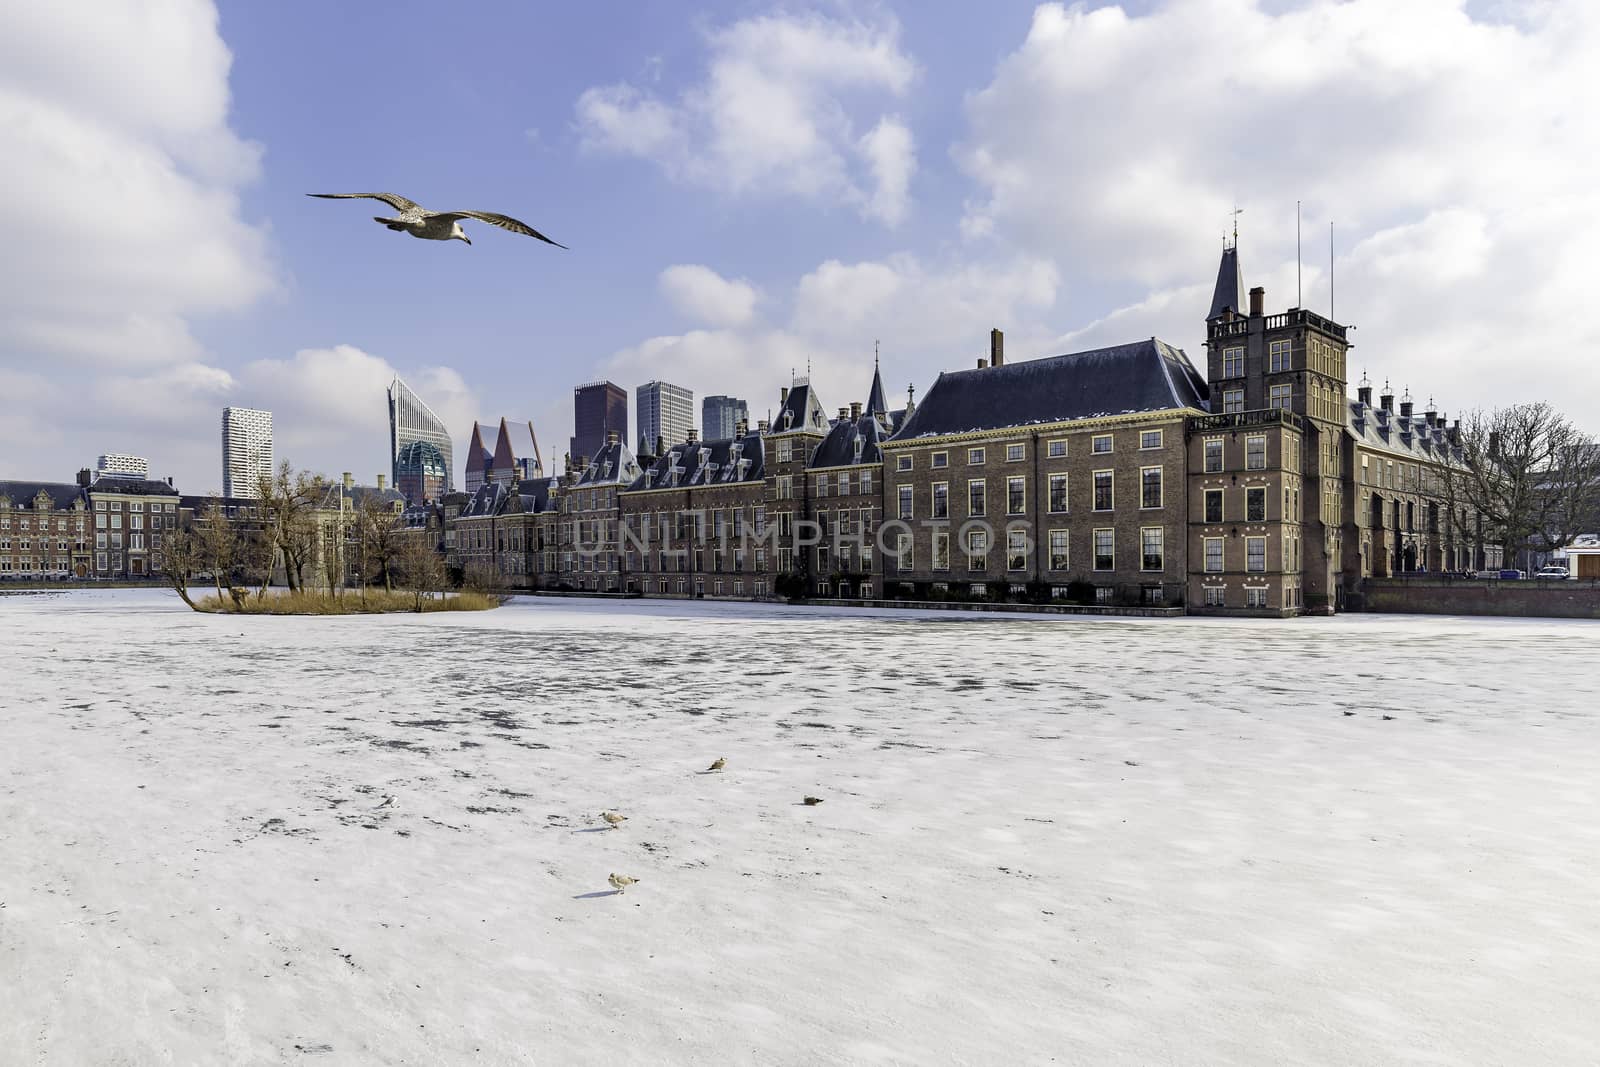 Seagull flying above the Dutch parliament building and its frozen pond water by ankorlight